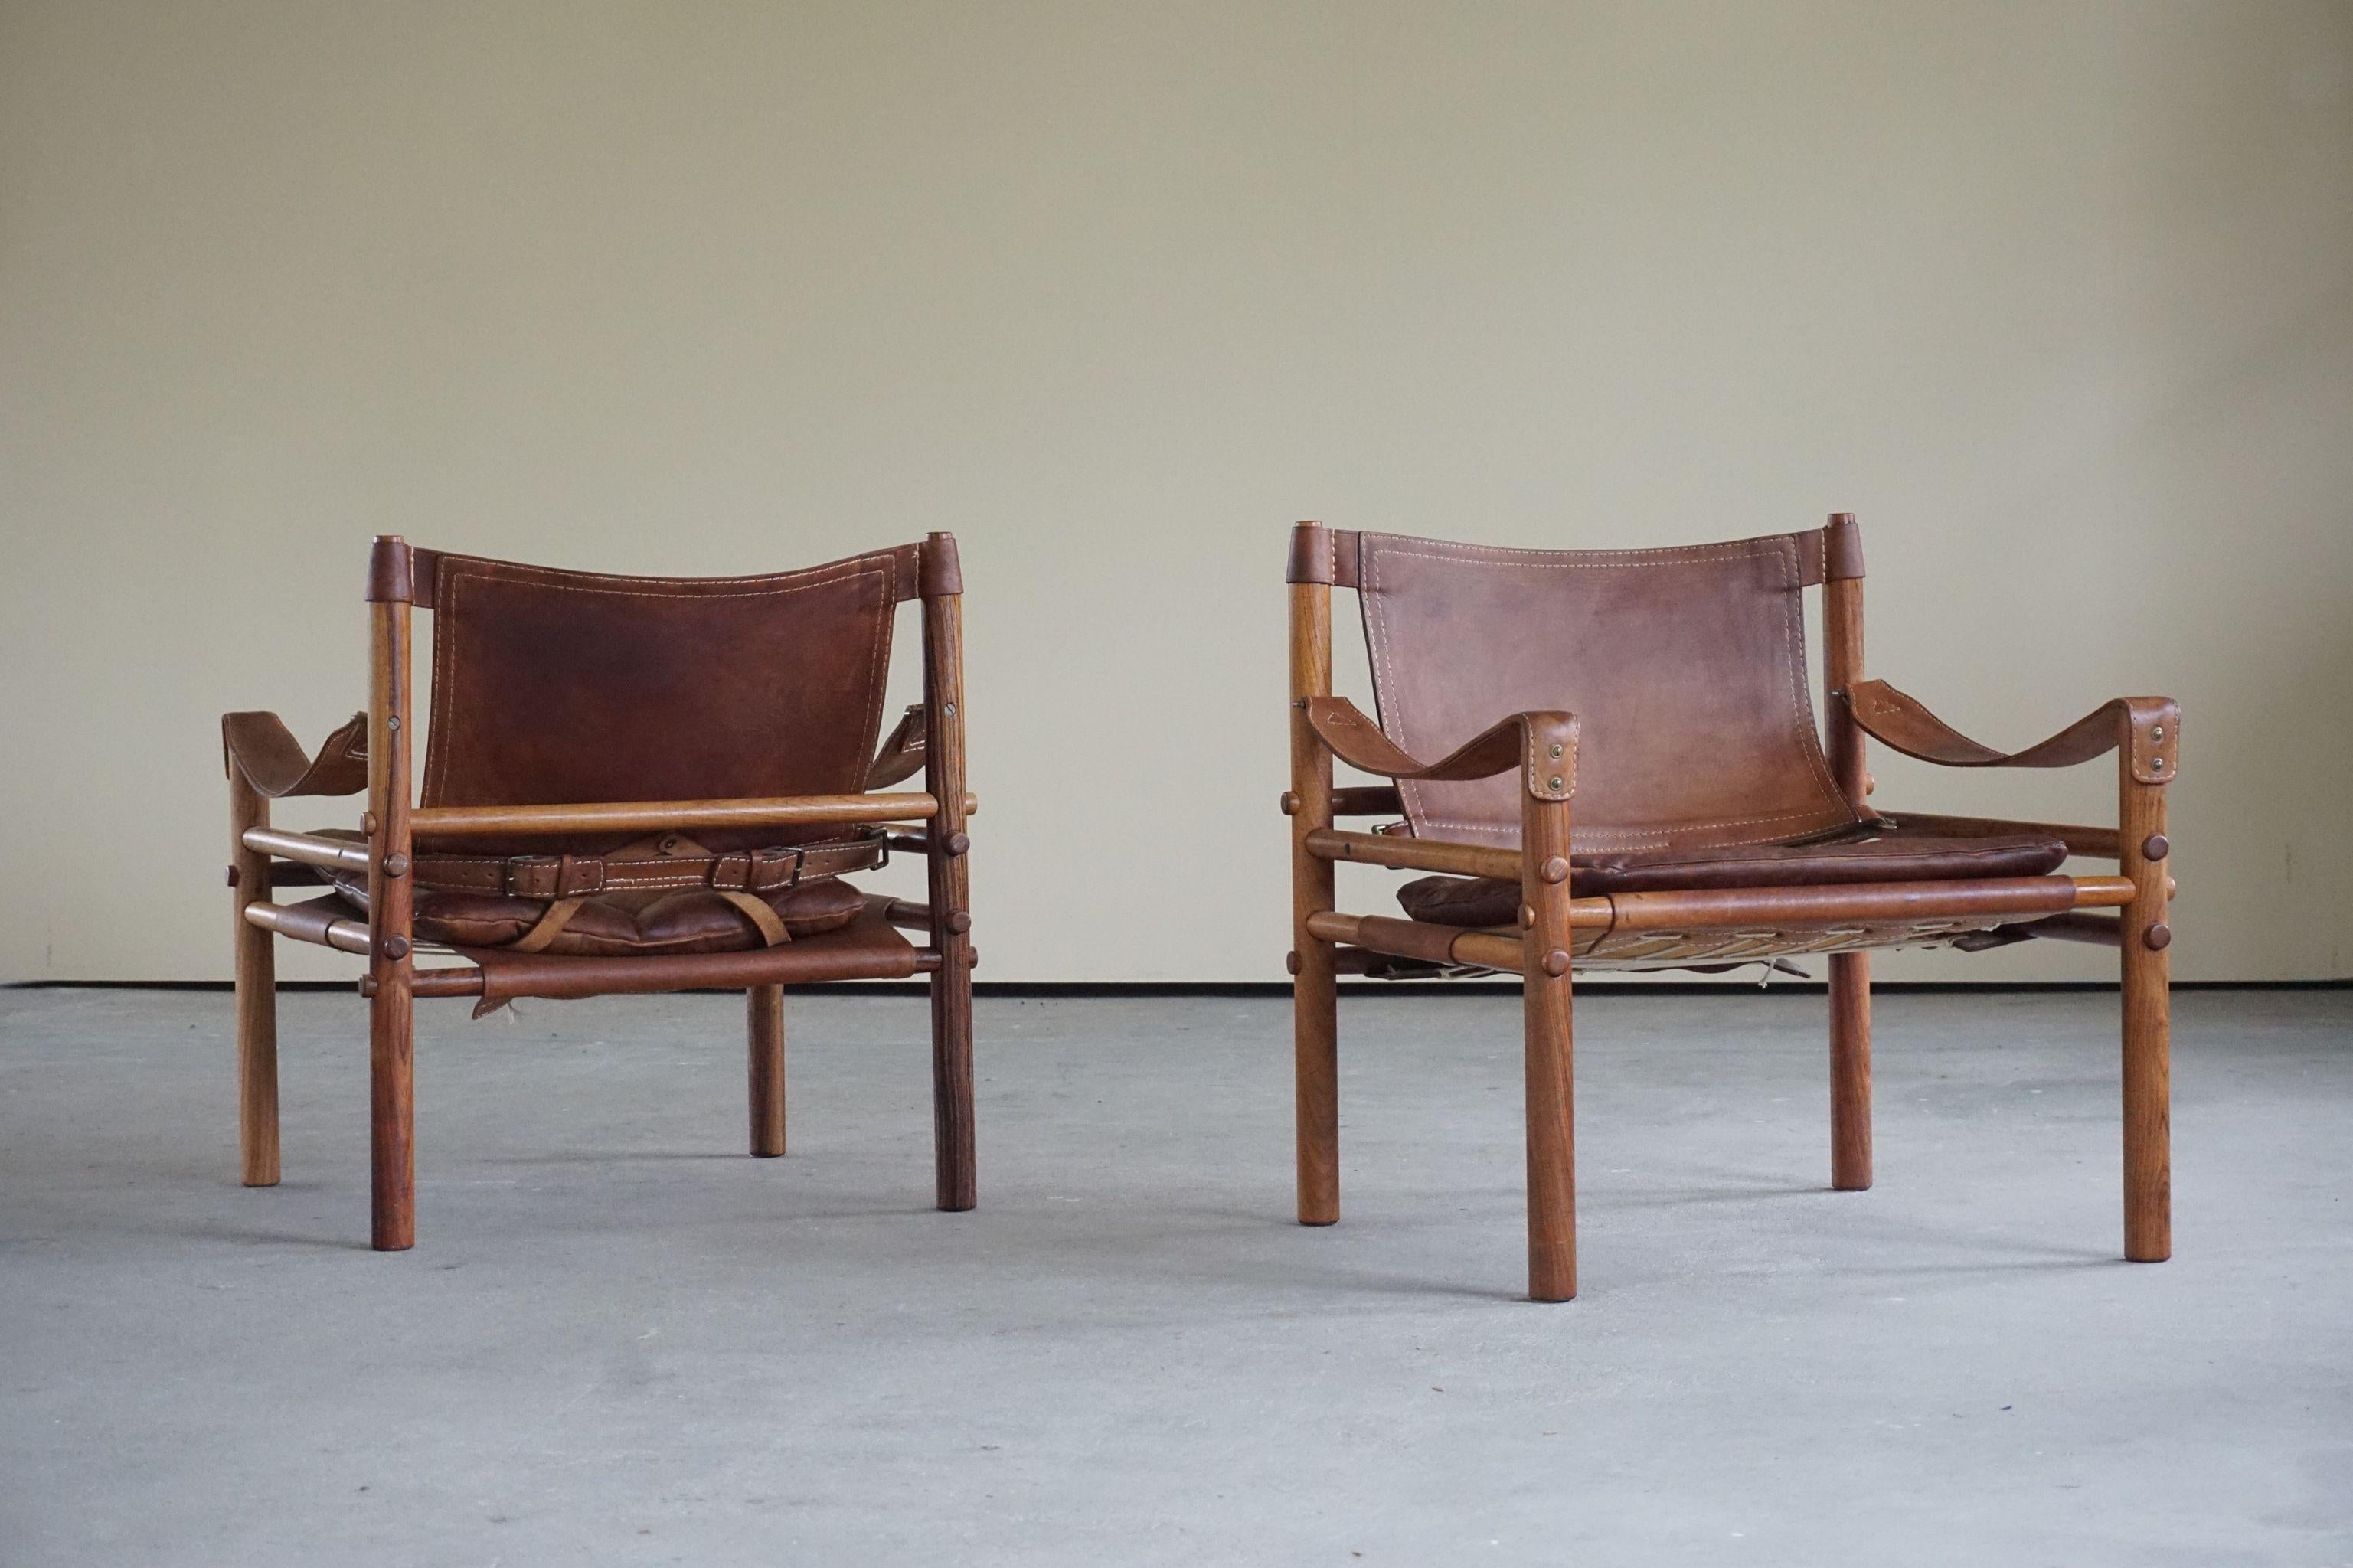 Pair of Sirocco Safari Chairs, Made by Arne Norell AB in Aneby Sweden, 1960s 1